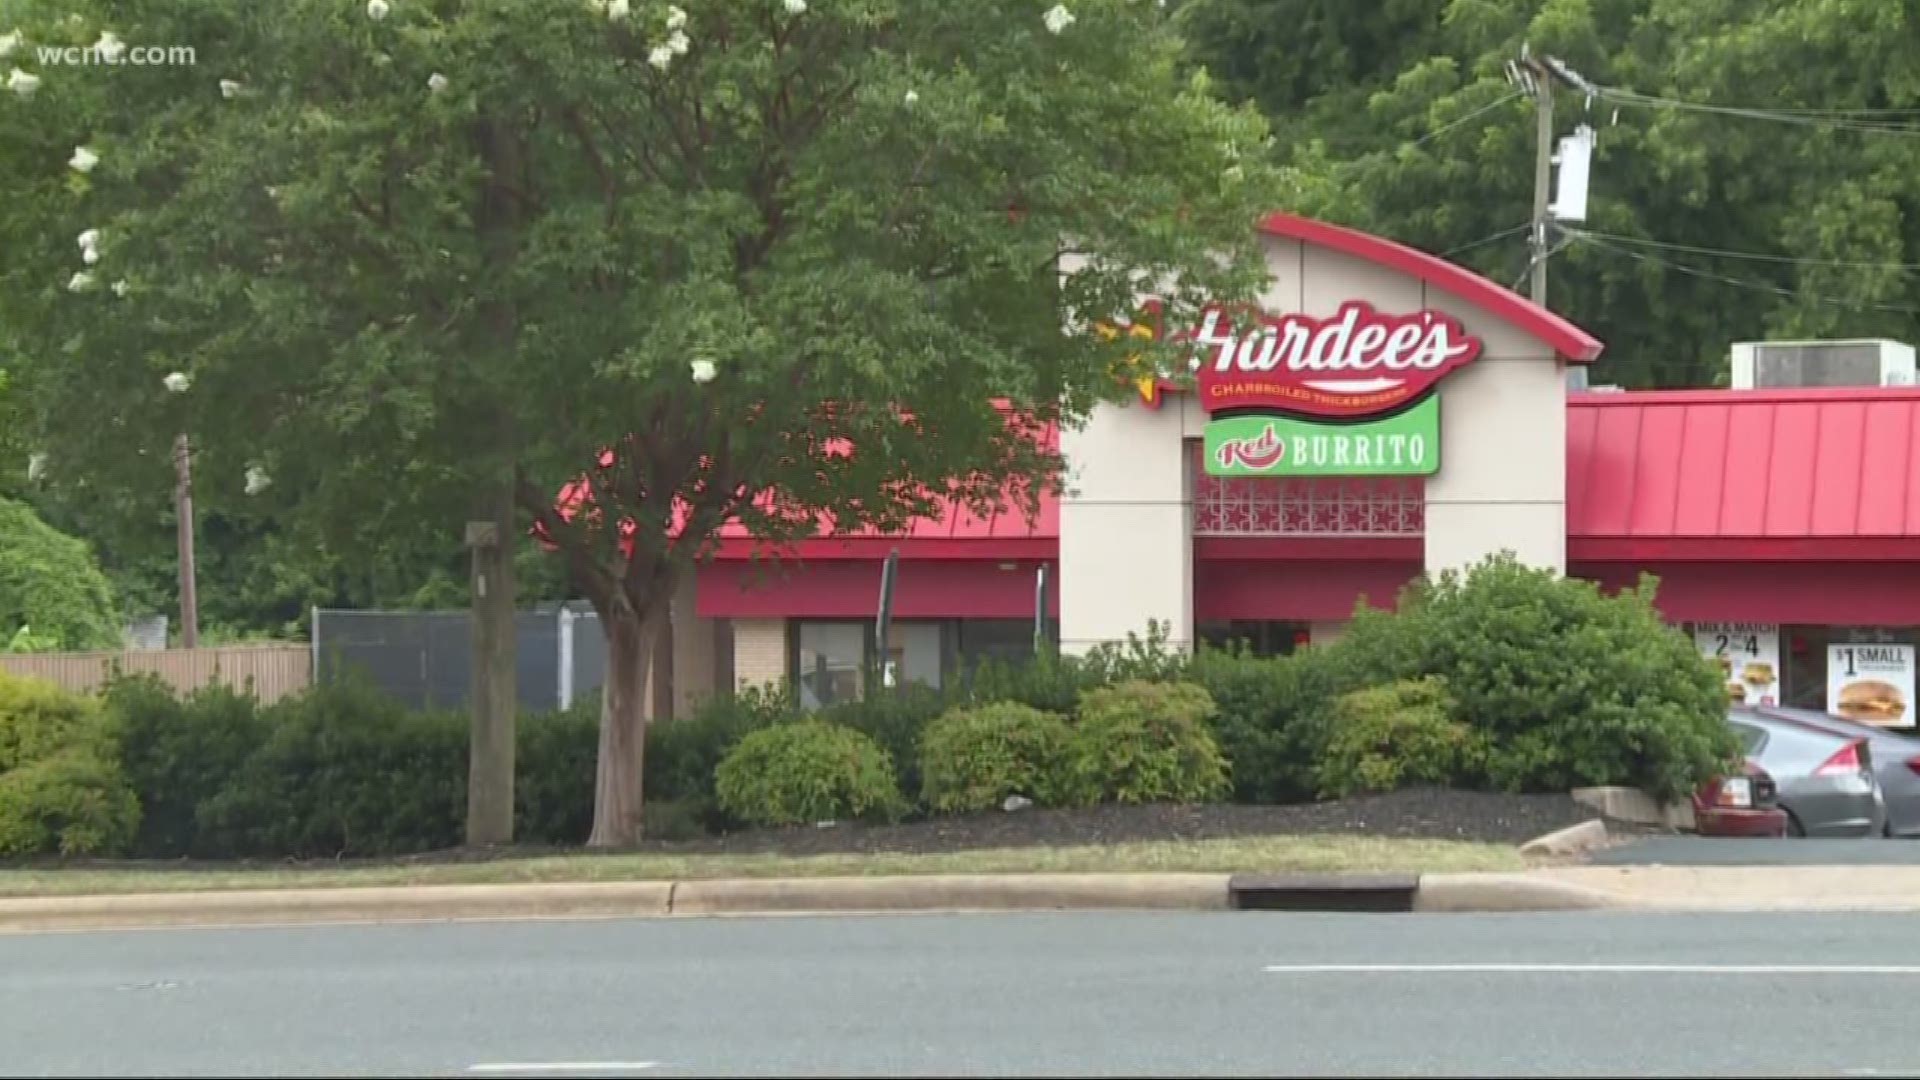 Patrons who ate at Hardee's restaurant on Little Rock Road in Charlotte between June 13 and 23 should receive a hepatitis A vaccination as soon as possible.